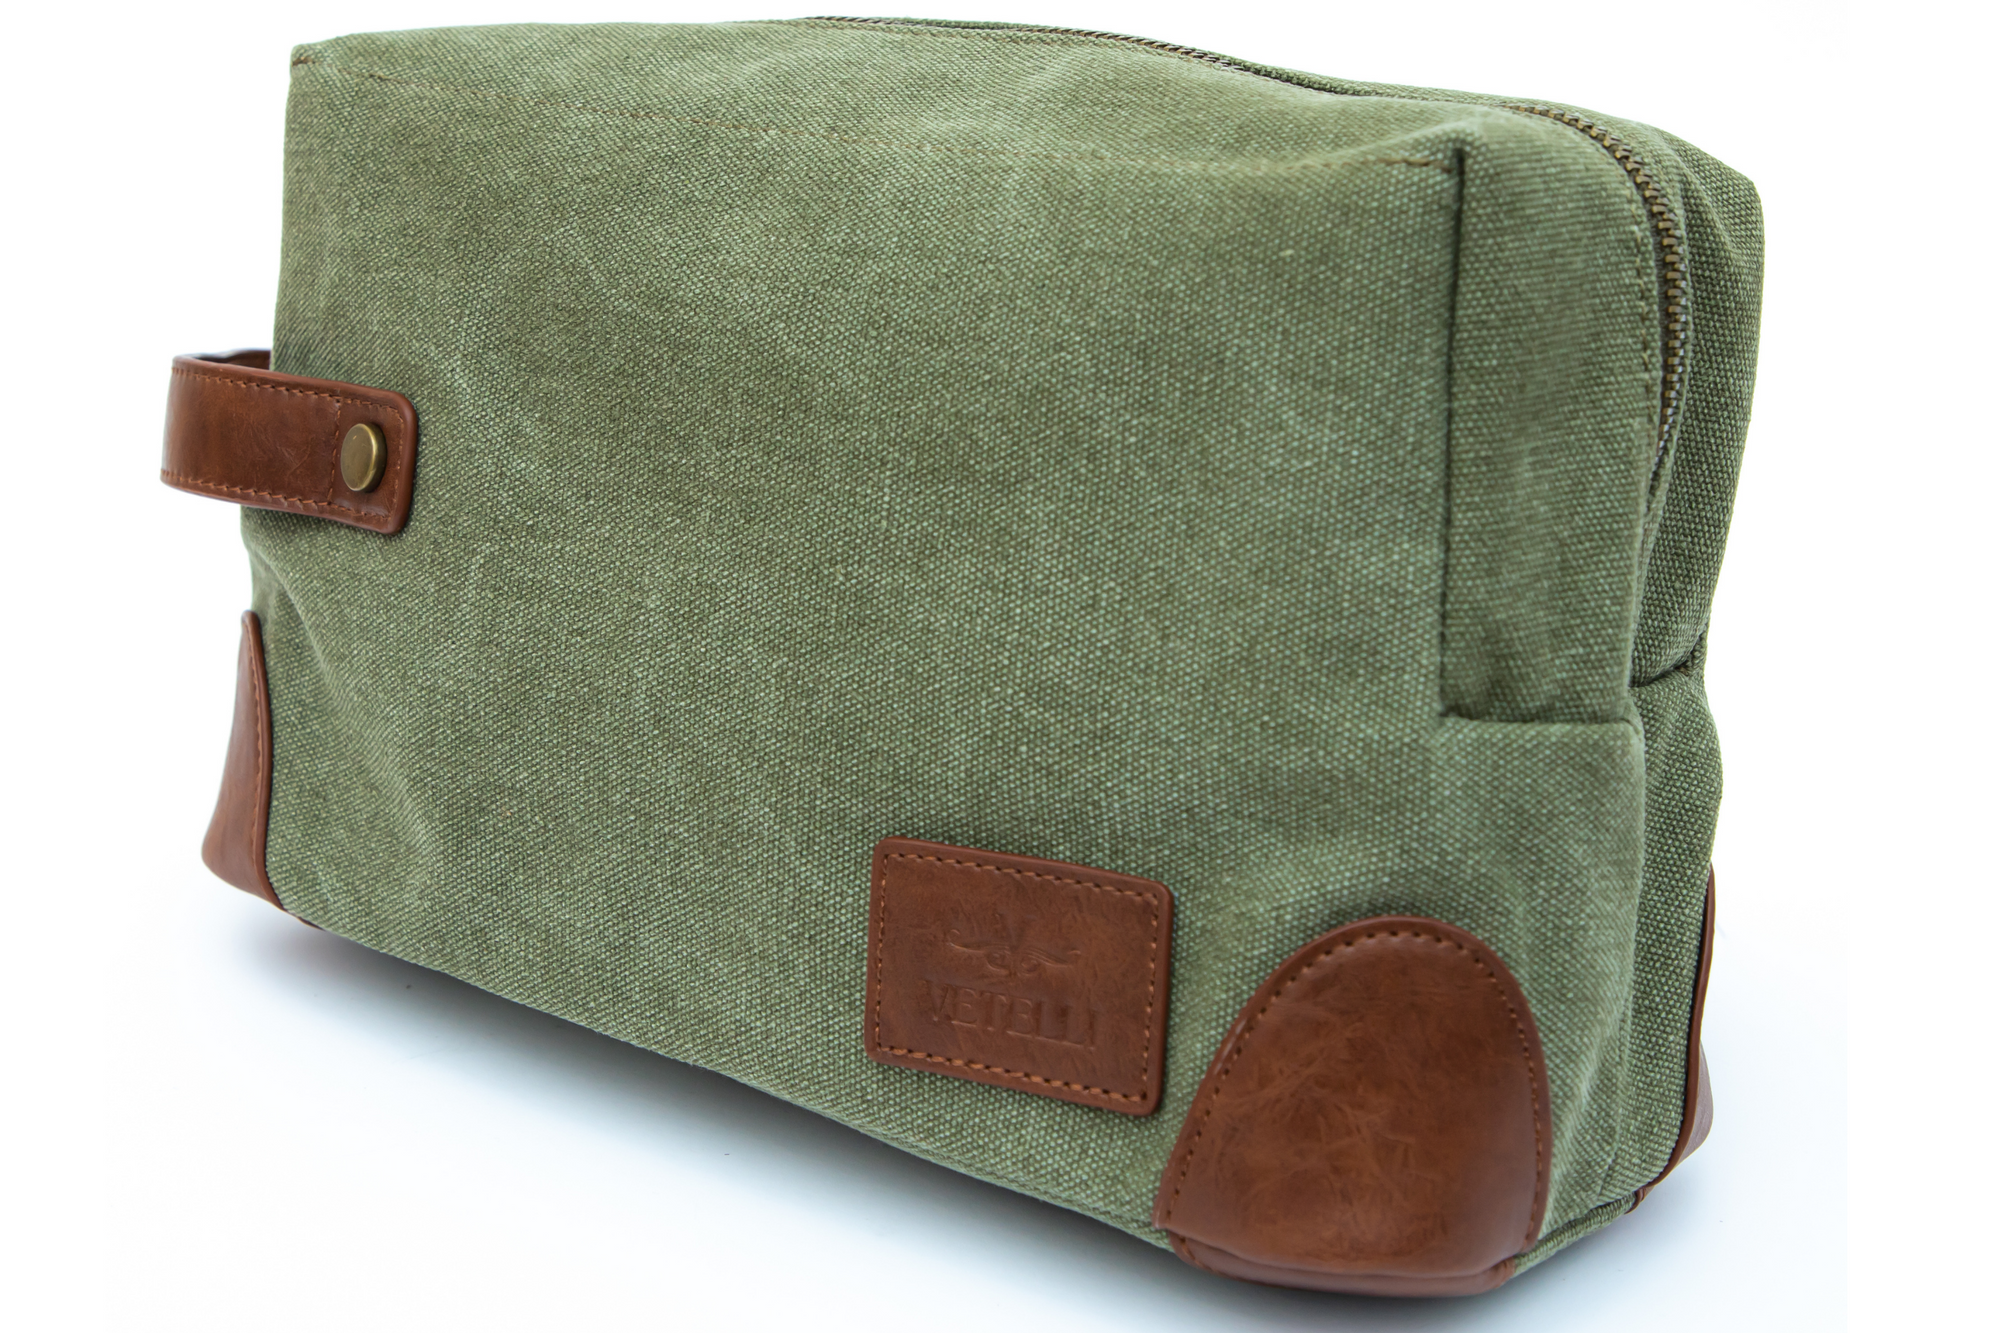 The Marco Canvas Toiletry Bag